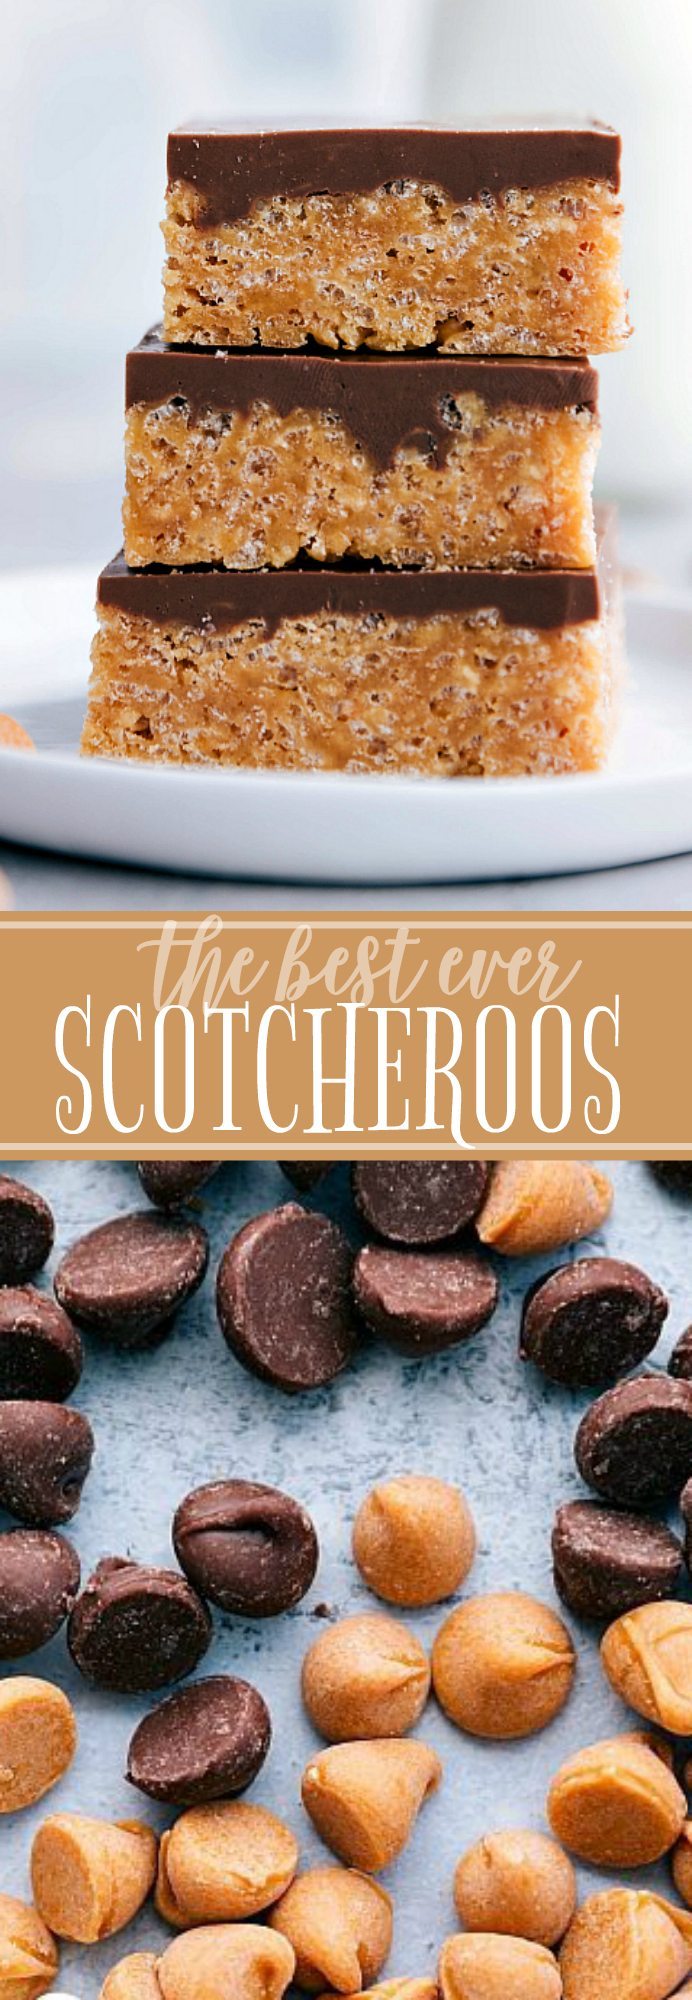 The ultimate BEST EVER SCOTCHEROOS! A super easy and quick dessert that everyone goes crazy for! via chelseasmessyapron.com | #scotcheroos #dessert #desserts #bar #bars #easy #quick #kidfriendly #butterscotch #chocolate #chips #ricekrispies